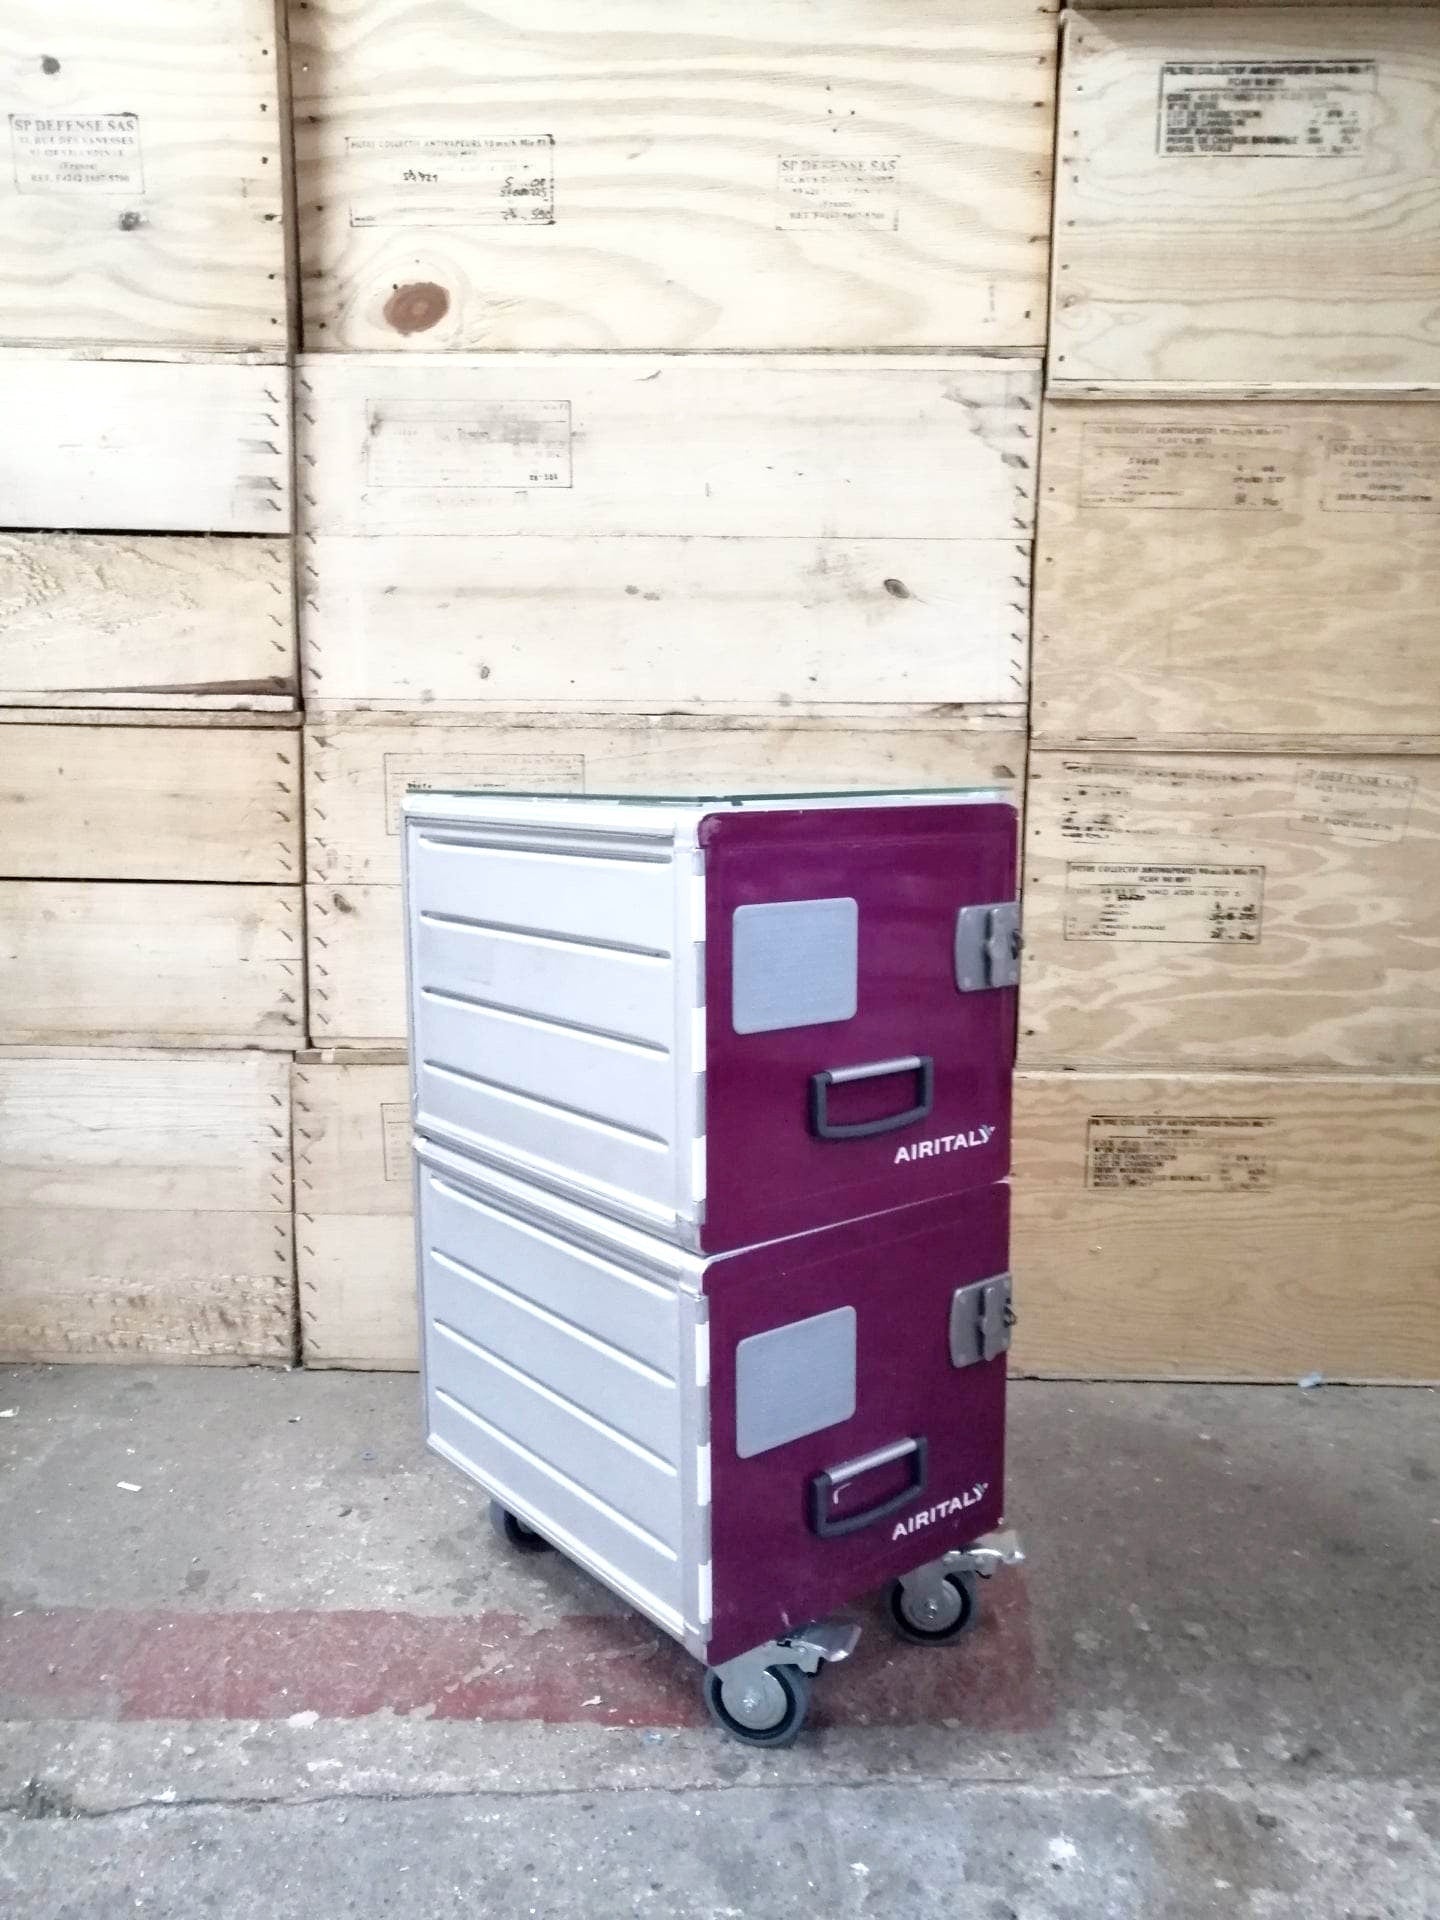 Aircraft Cabinet, Aviaton Storage Cart, Side Table Made of Original Airline Galley Boxes Air Italy, Handmade